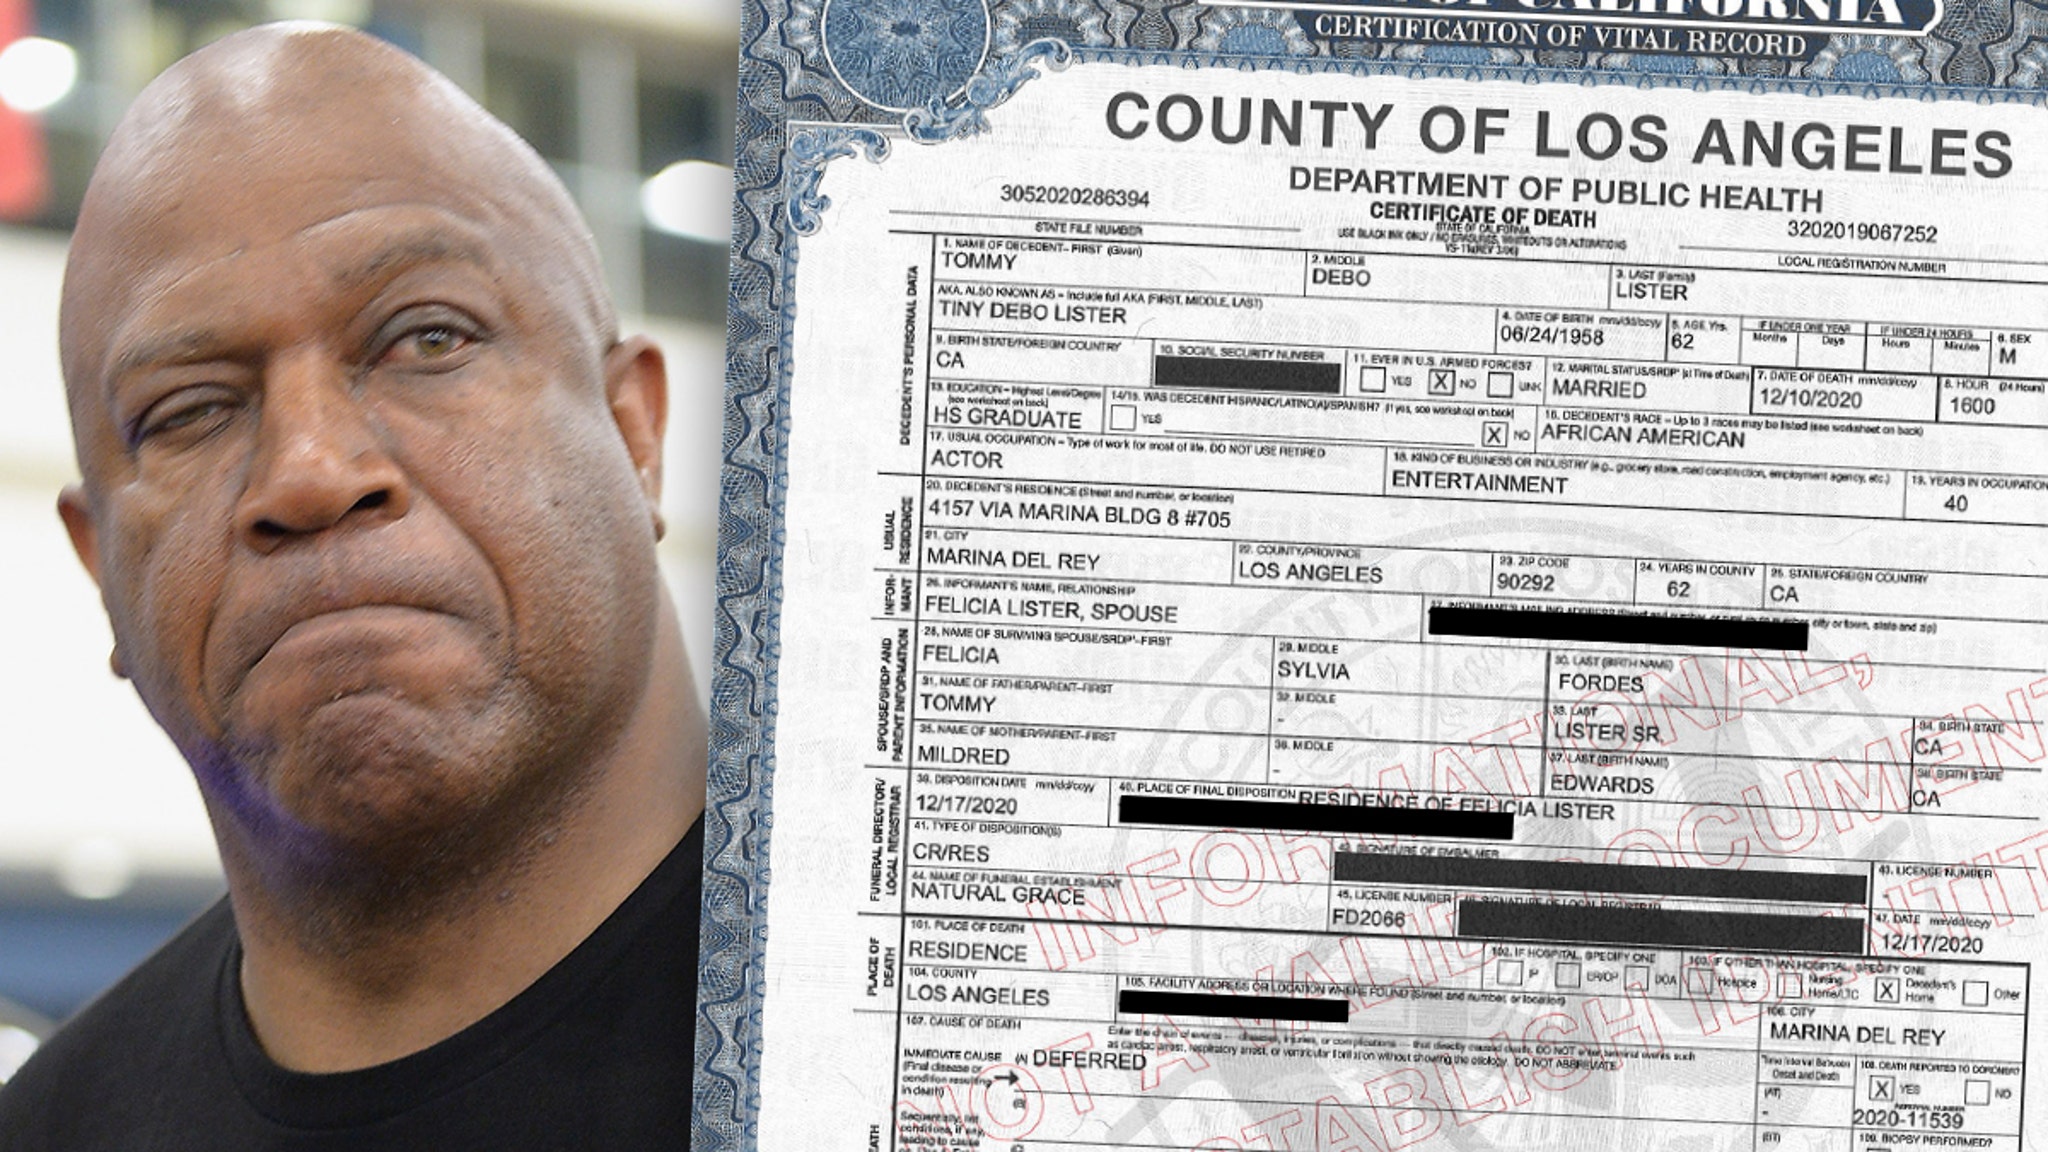 Tommy Lister legally changed the name to ‘Debo’ in honor of ‘Friday’